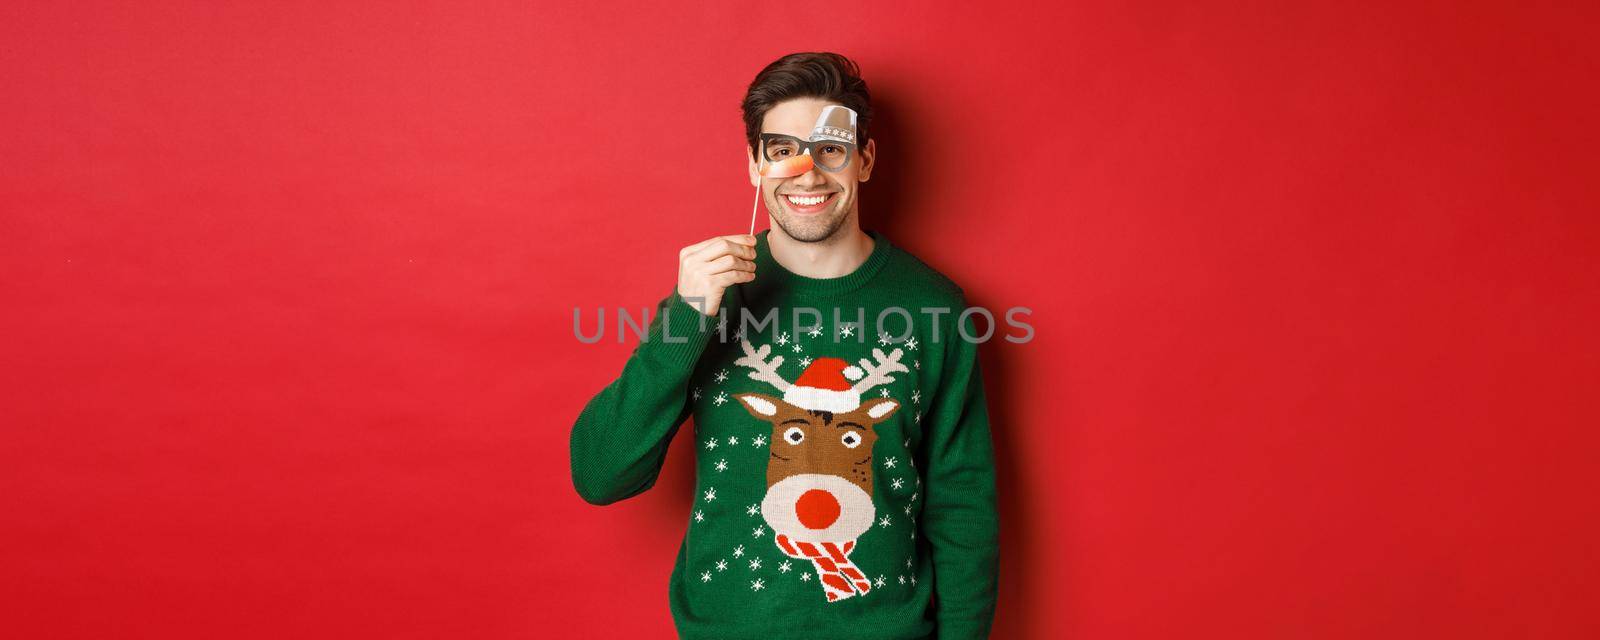 Funny man in christmas sweater and party mask, celebrating winter holidays, smiling happy, standing over red background.